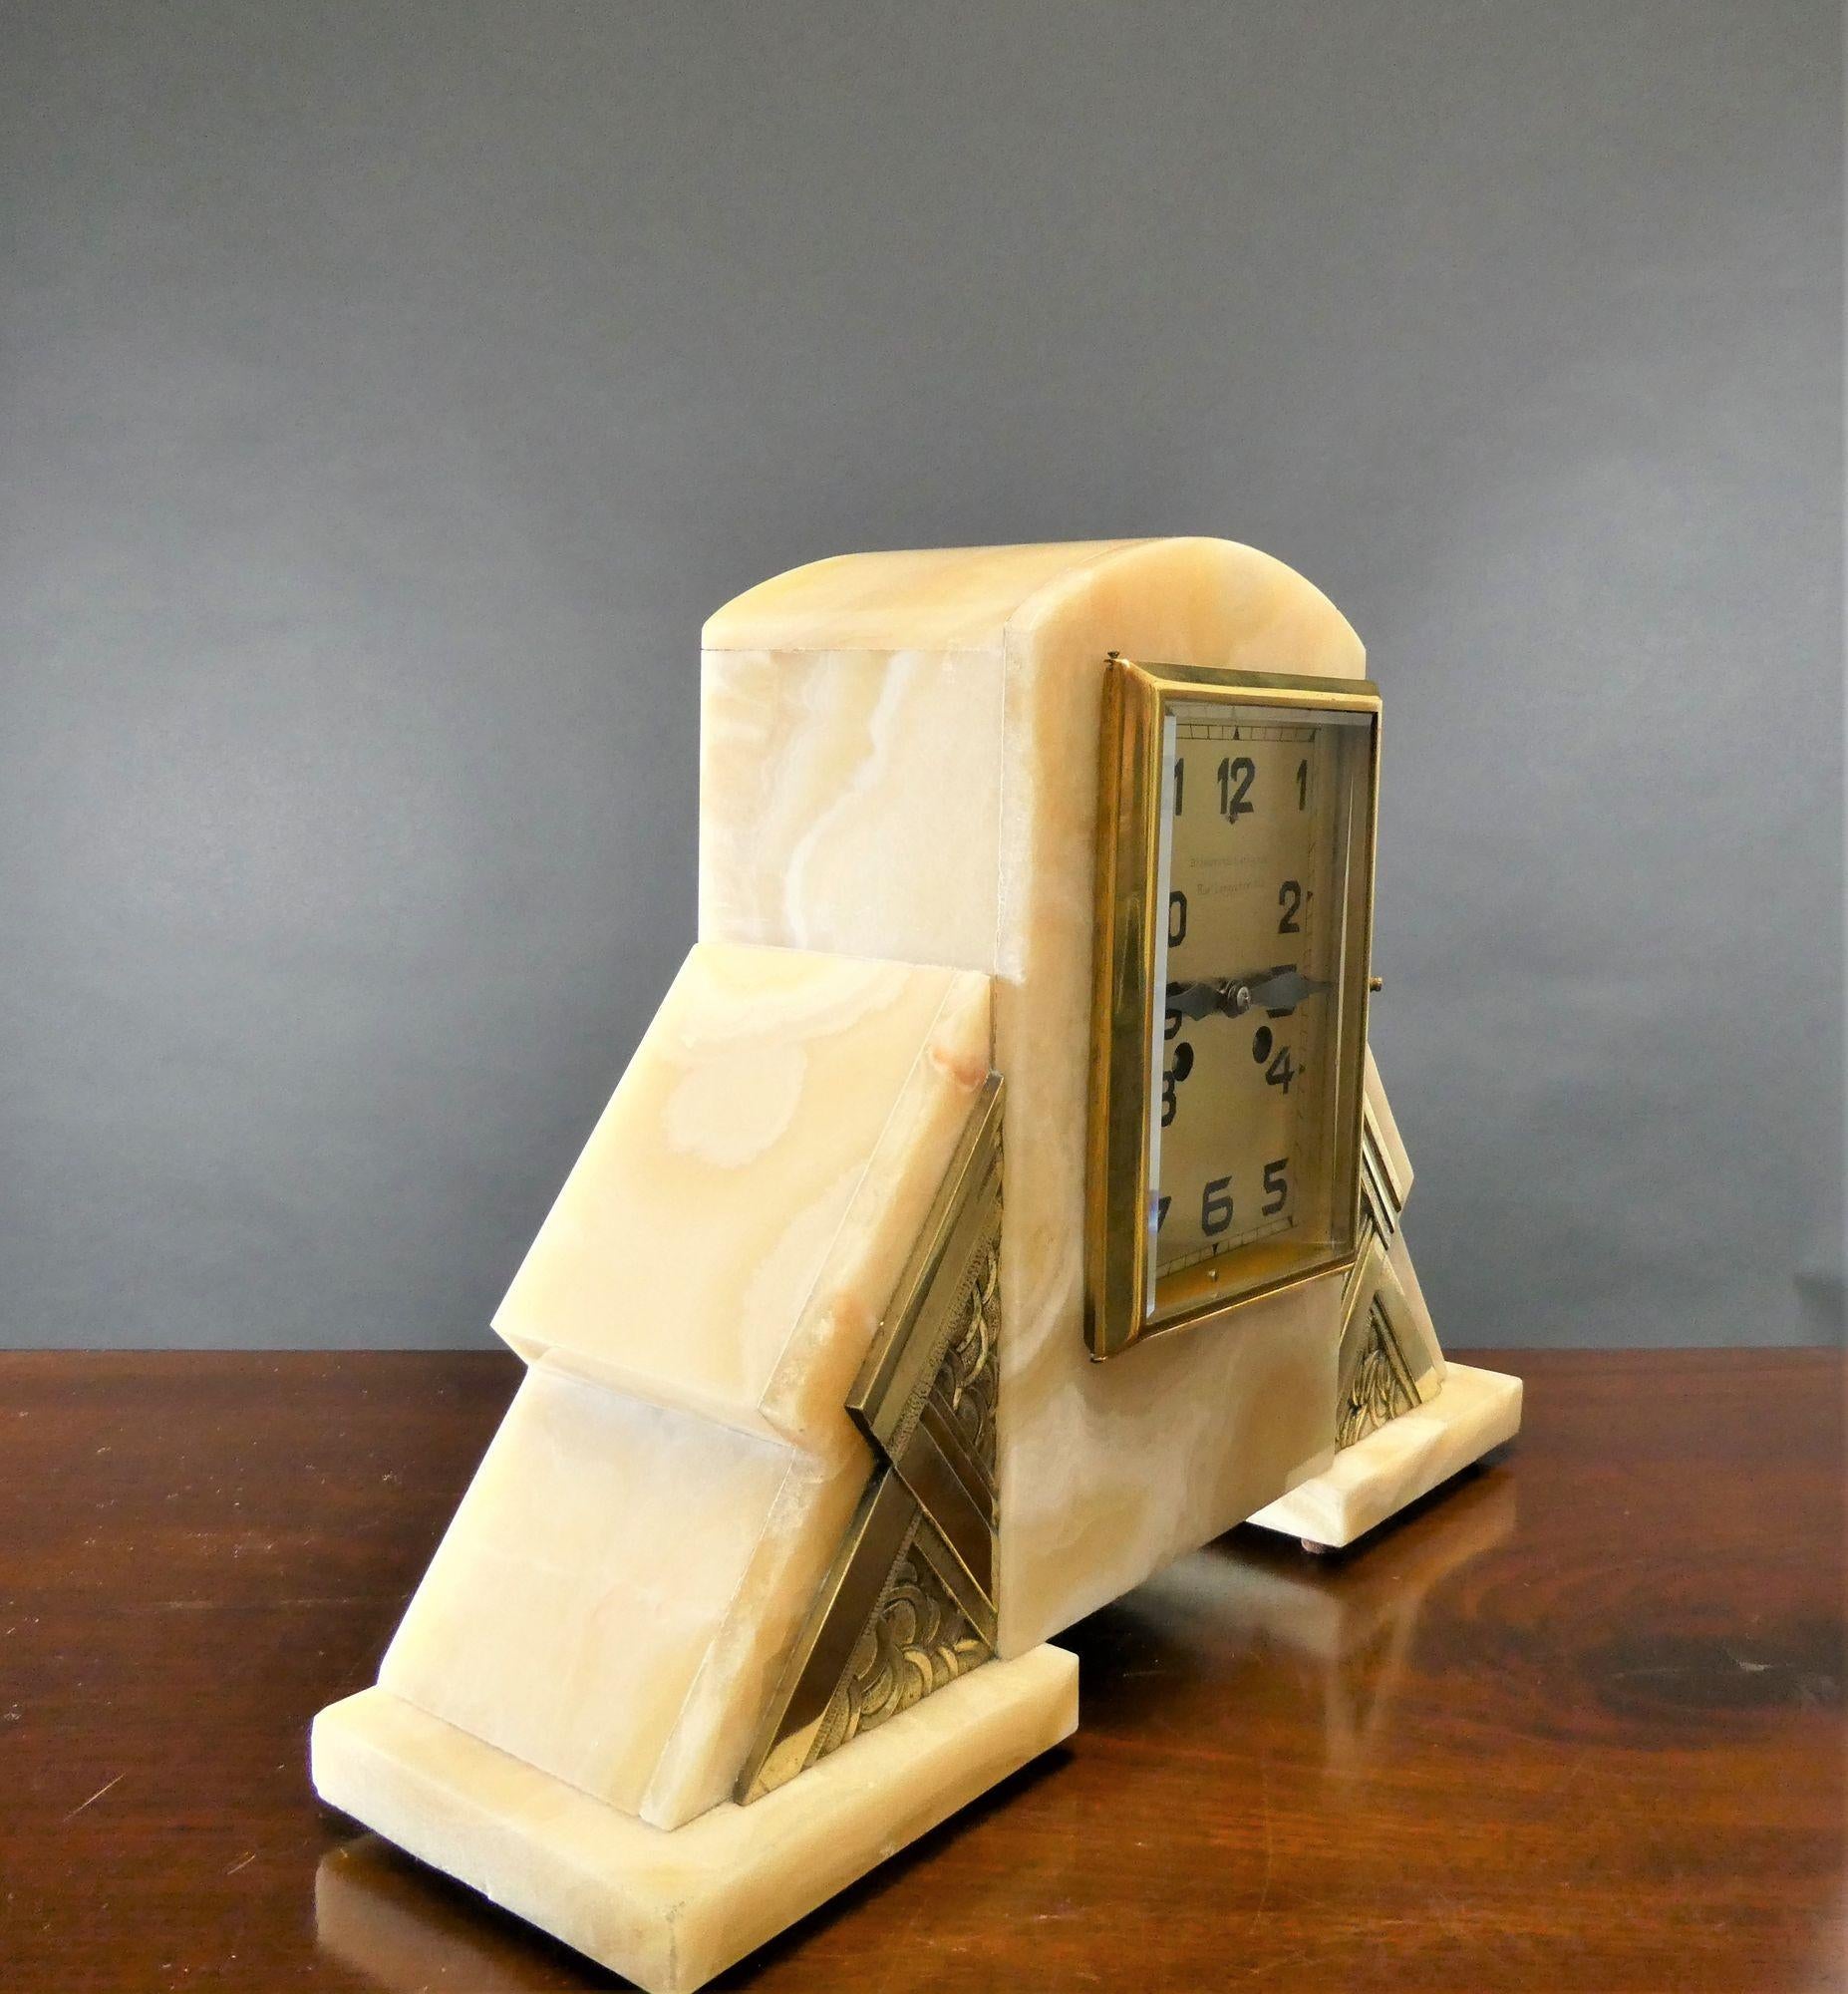 Art Deco Mantel Clock
 
 
 
Art Deco mantel clock house in a finely figured marble stepped case with applied Art Deco style brass mounts.
 
Rectangular brass bezel opening to the gilded dial with Art Deco style numerals and hands signed